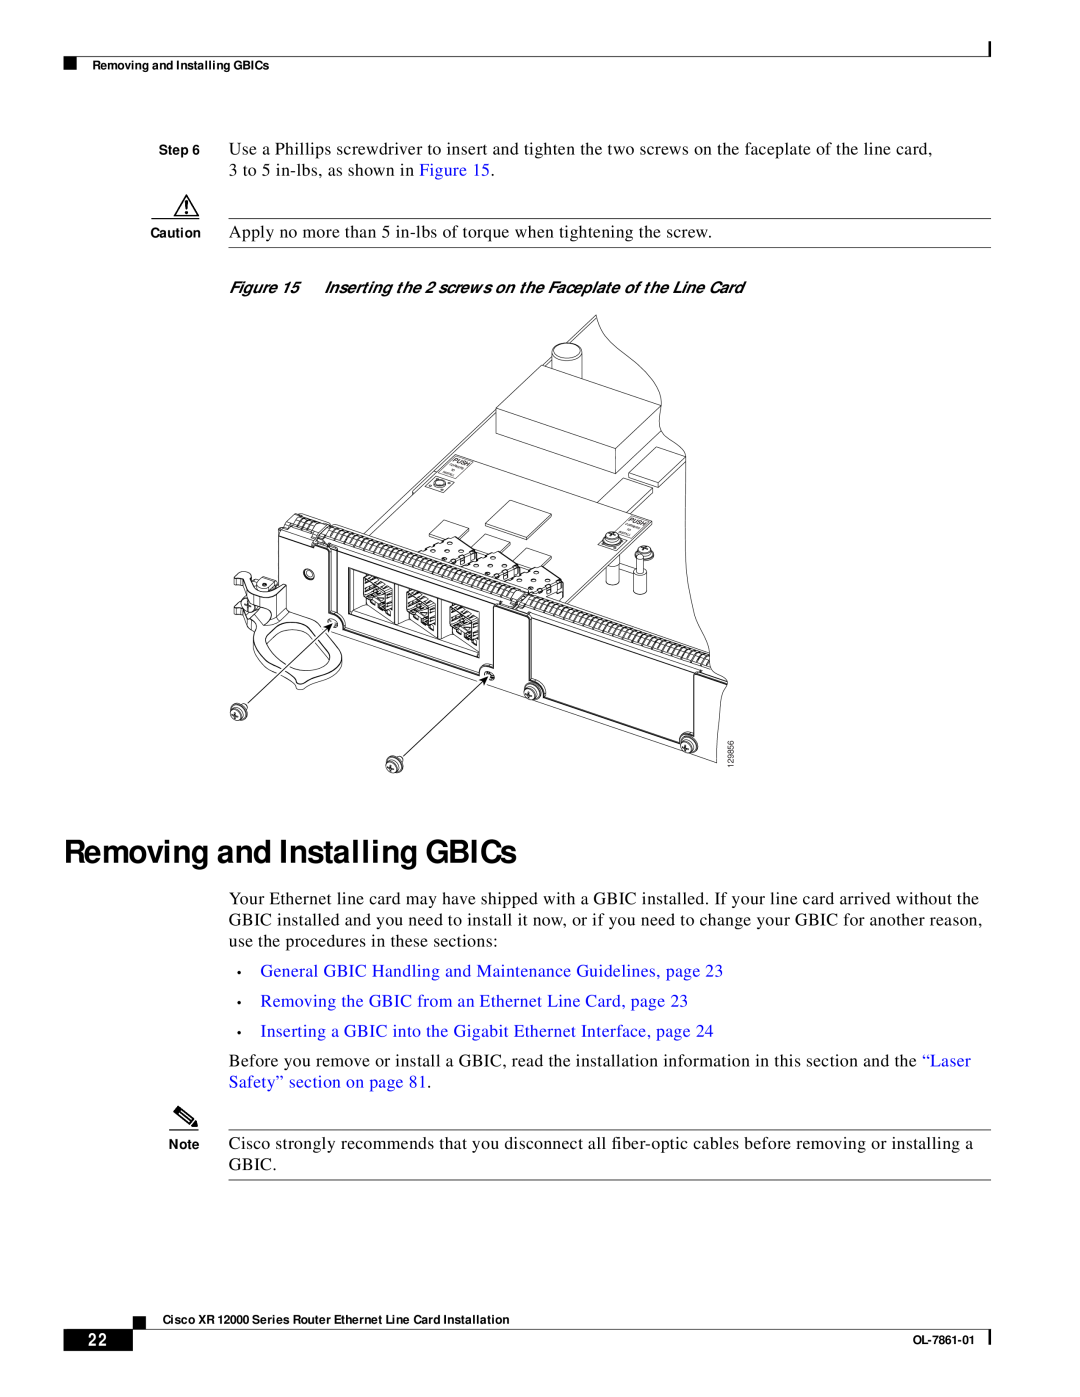 Cisco Systems OL-7861-01 manual Removing and Installing GBICs, General GBIC Handling and Maintenance Guidelines, page 